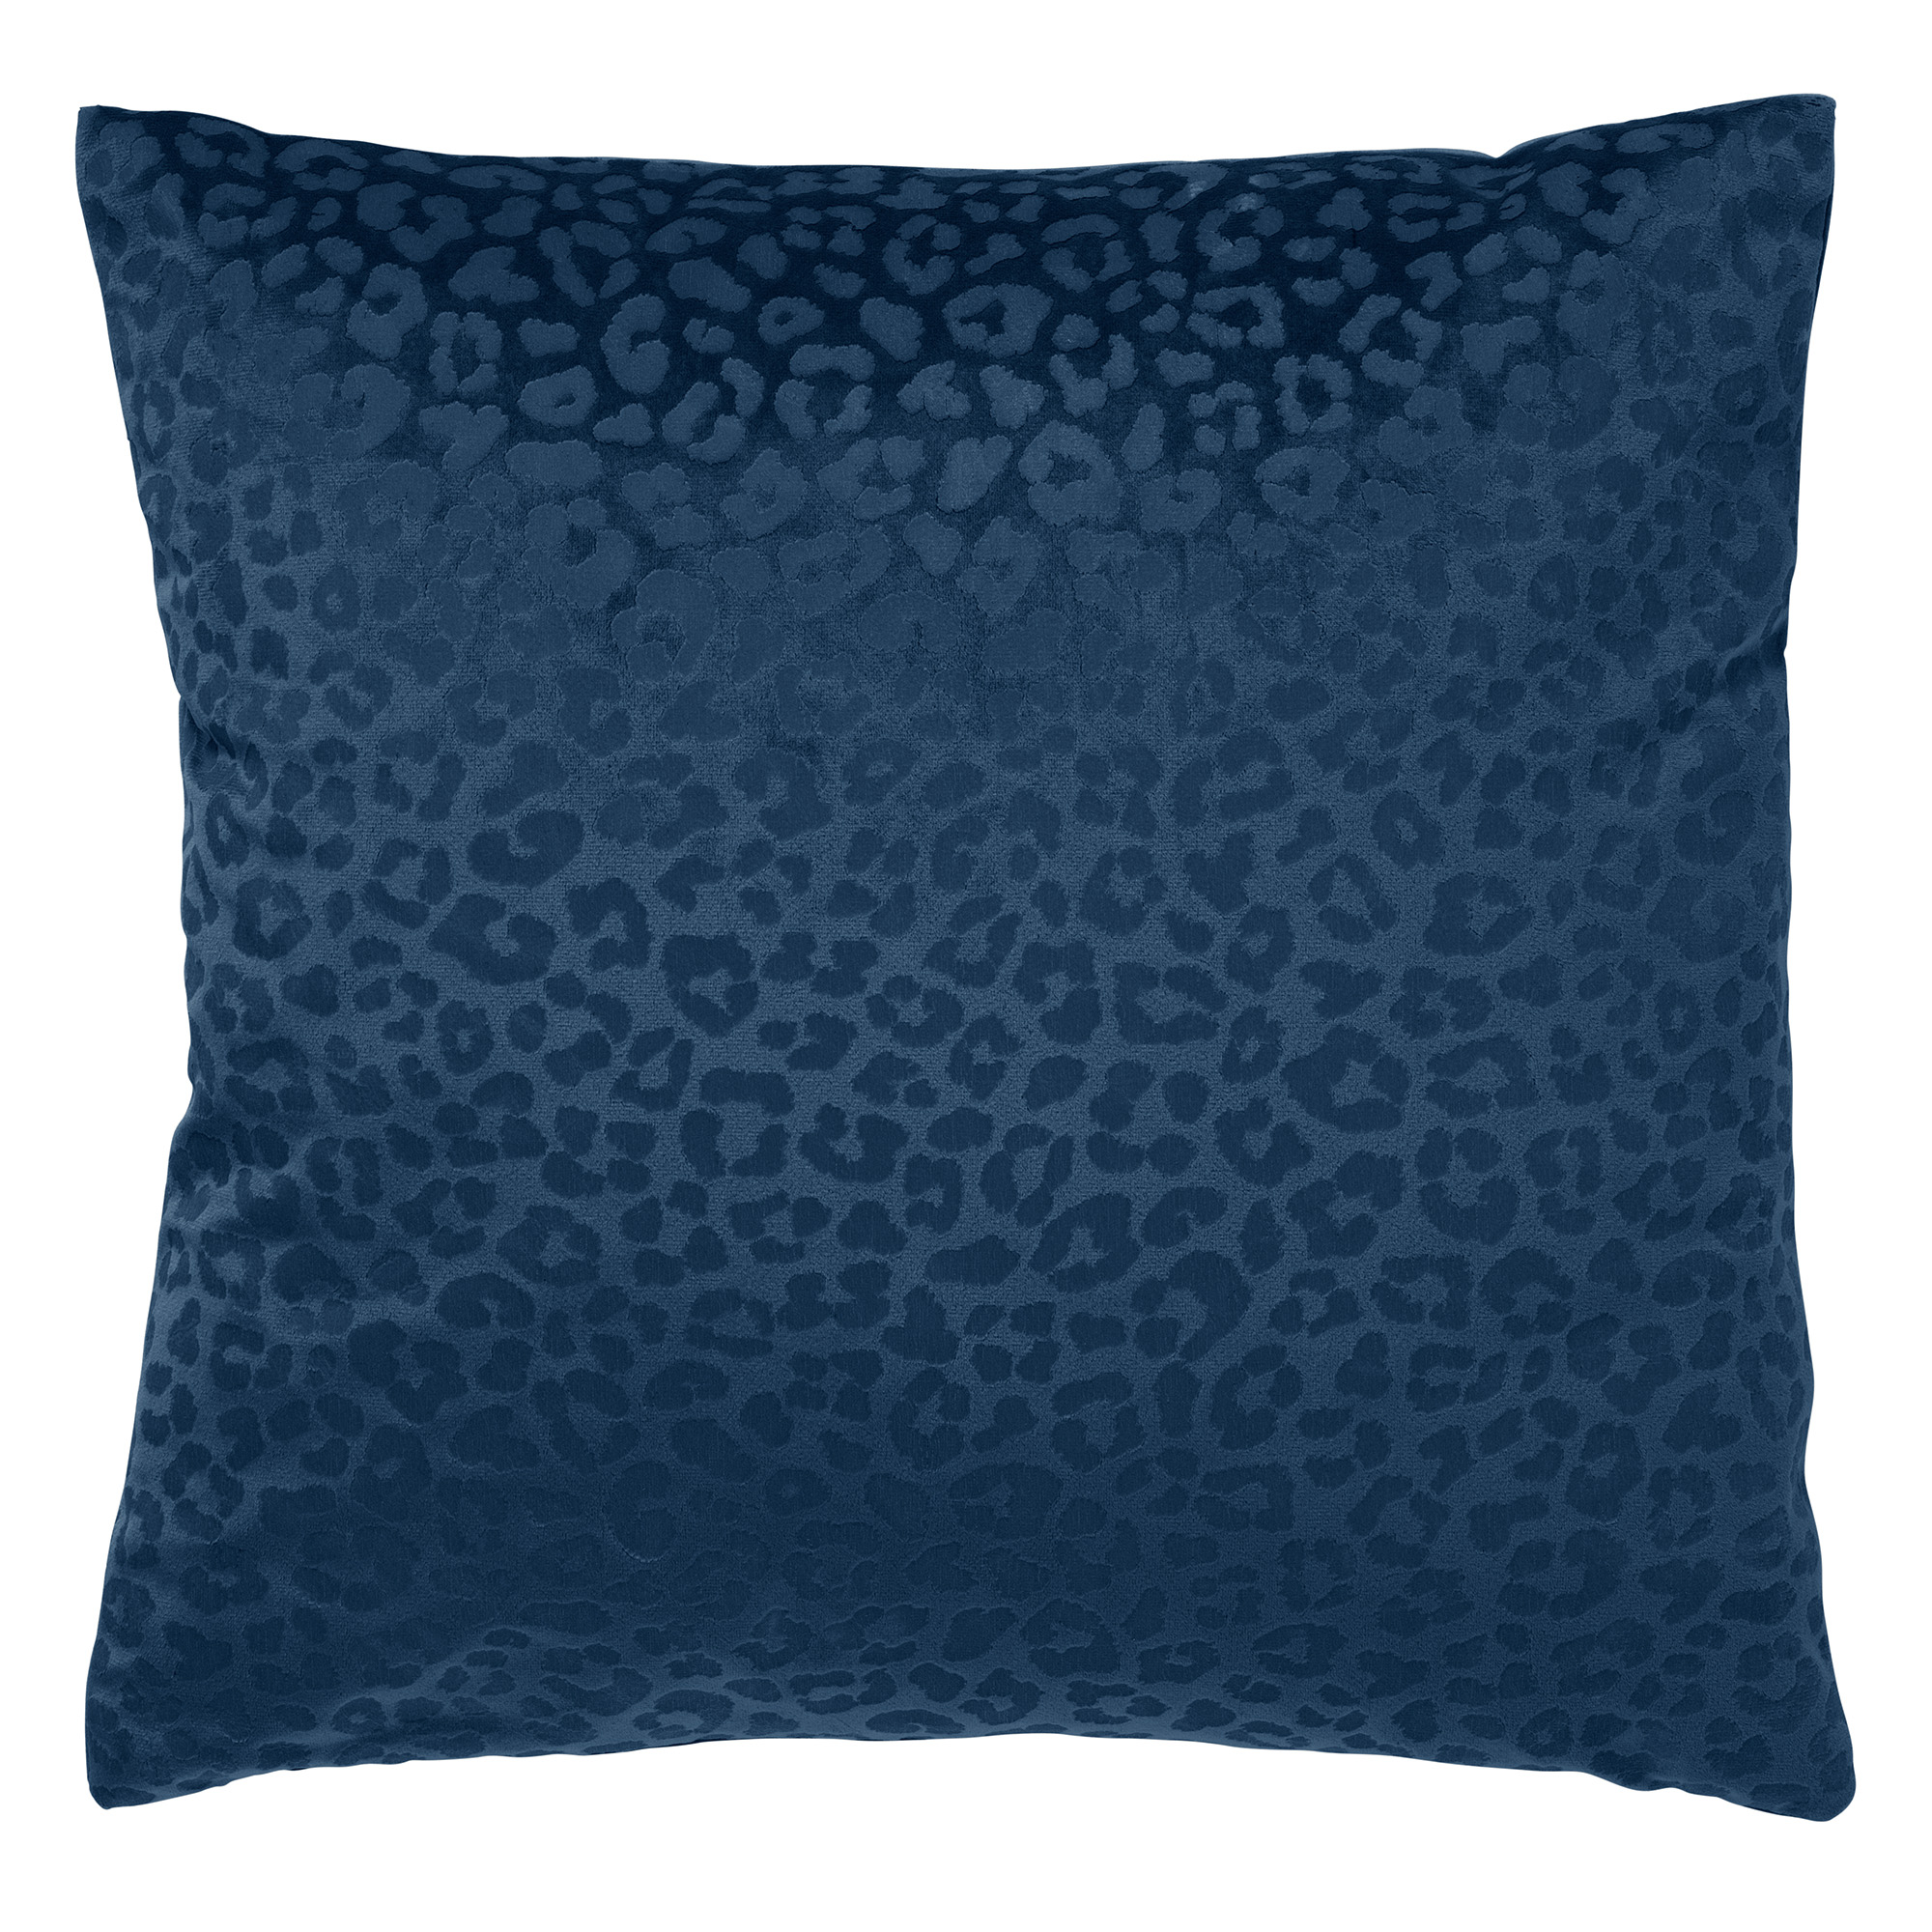 CHESSY - Cushion cover with animal print 45x45 cm Insignia Blue